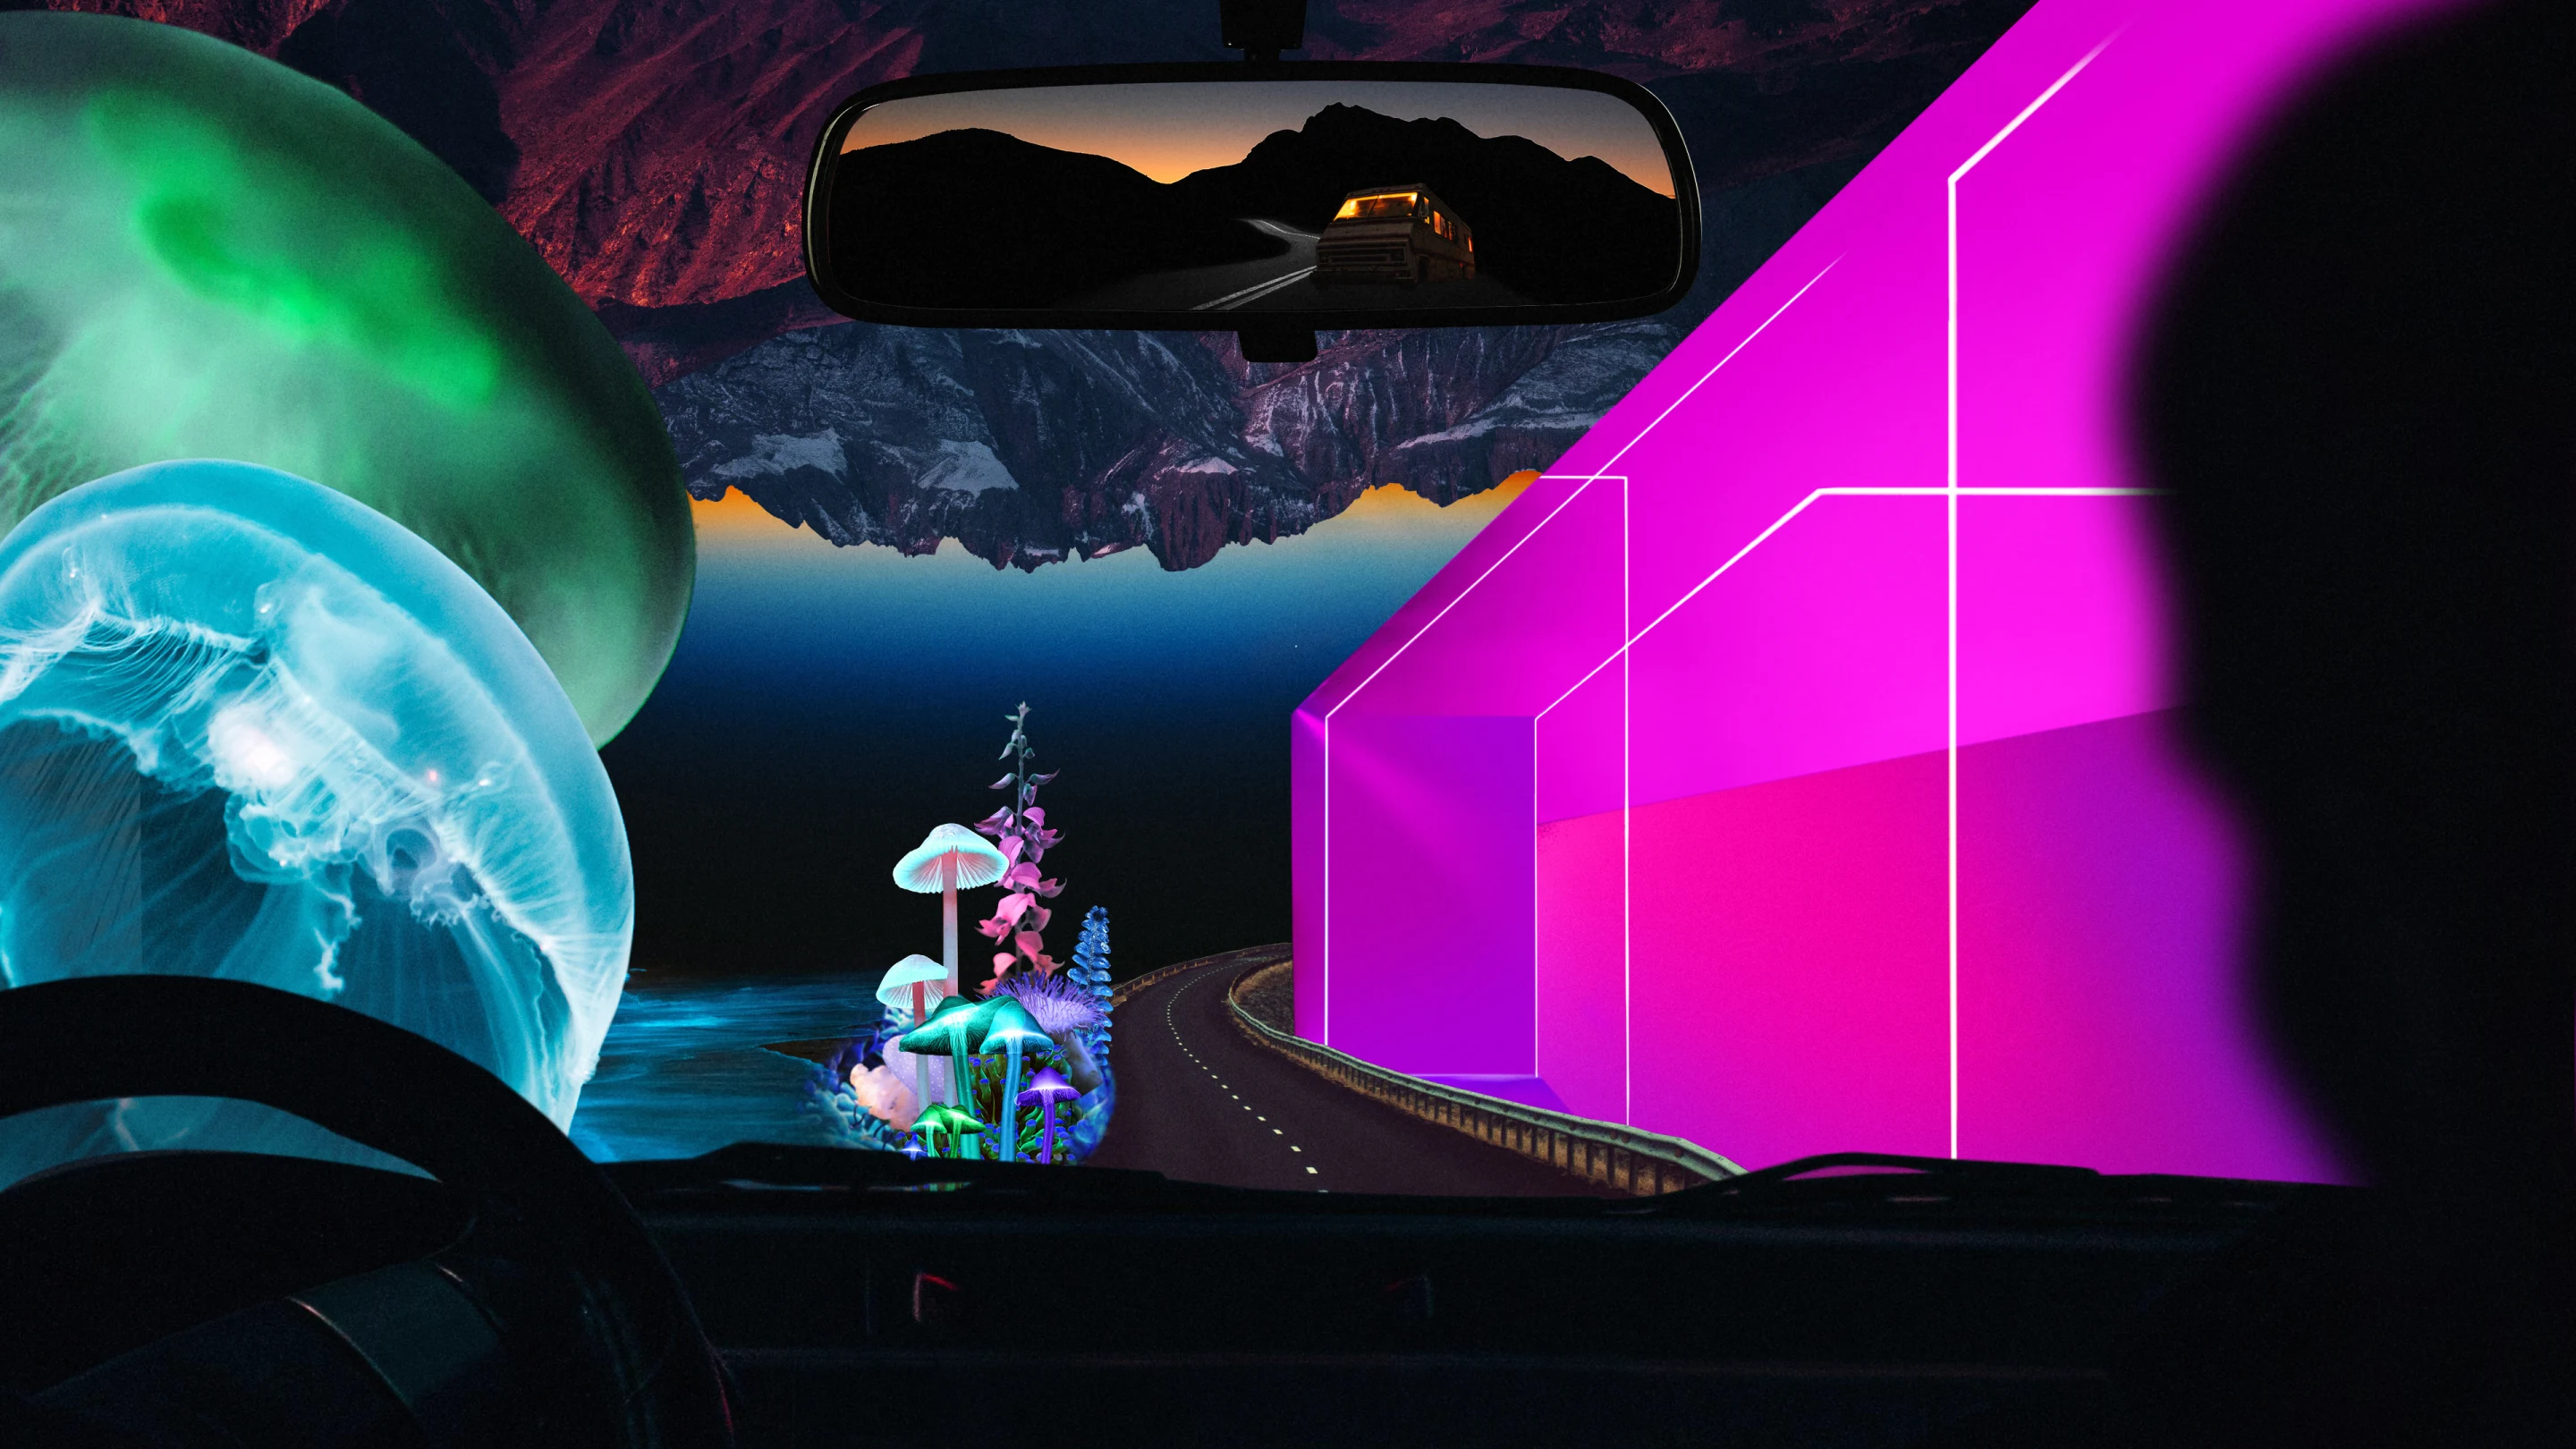 Vibrant collage seen through a car windscreen. A large jellyfish is on the left, with a neon pink geometric shape on the right and dark mountain formations and large cartoon mushrooms in the distance. A vehicle on a road with mountains in the background are seen through a rear-view mirror.